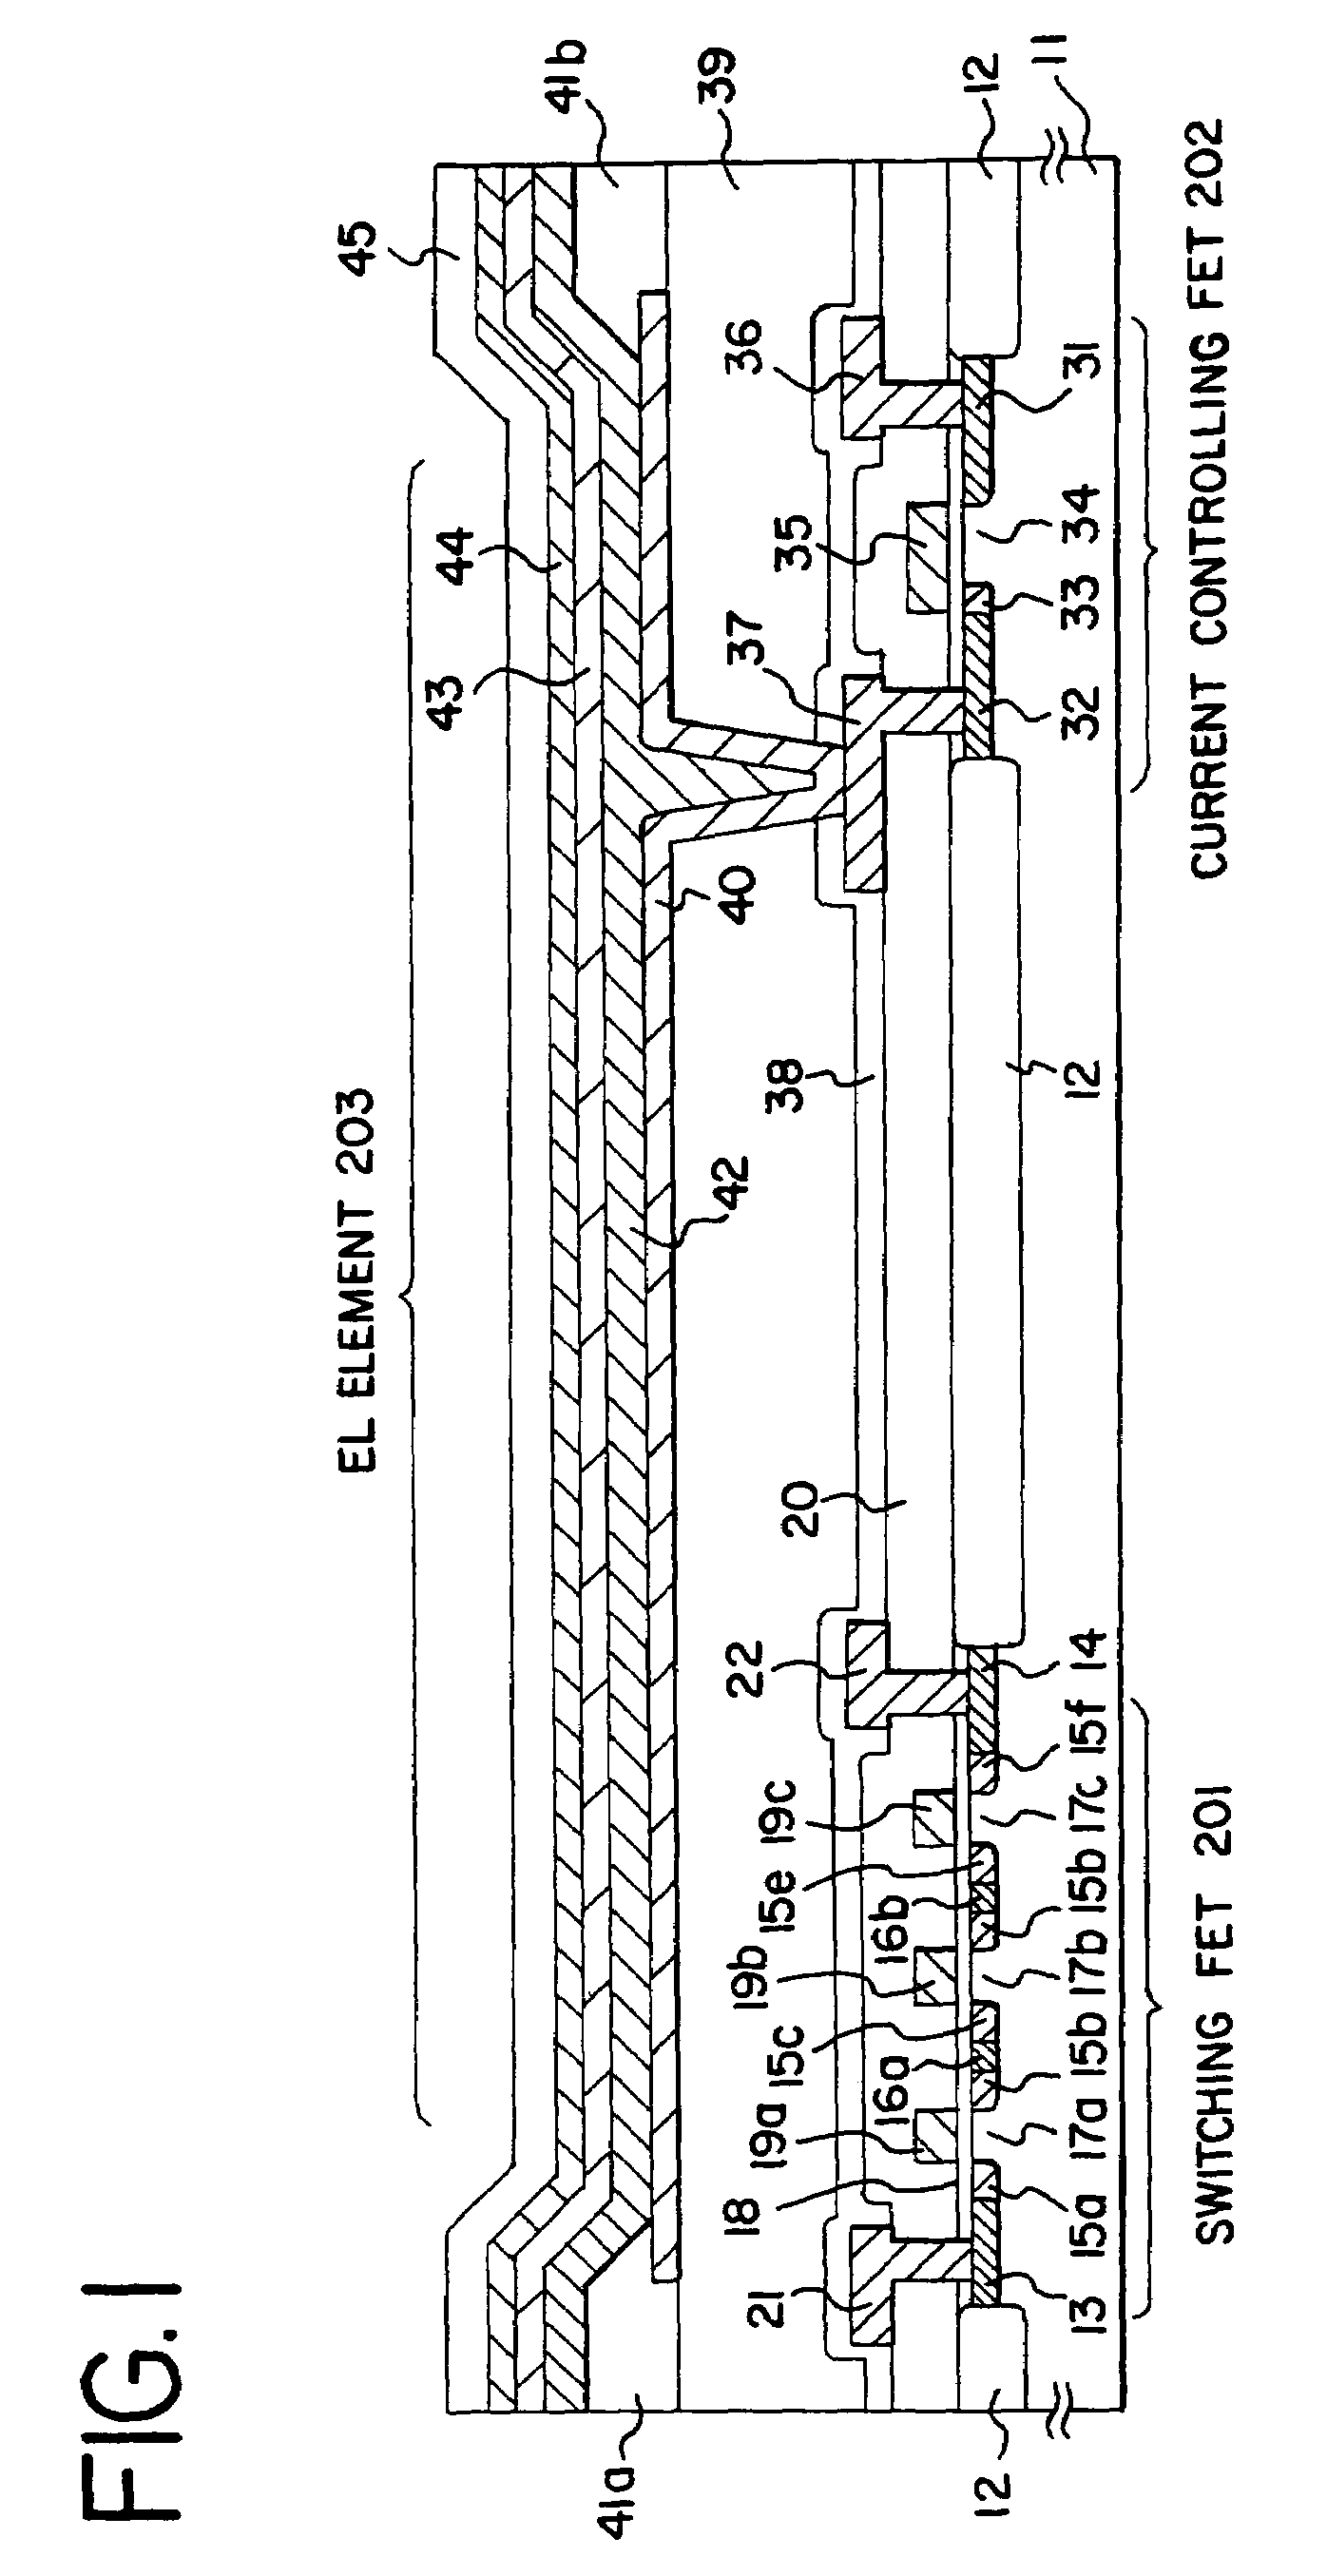 Display device using electroluminescence material